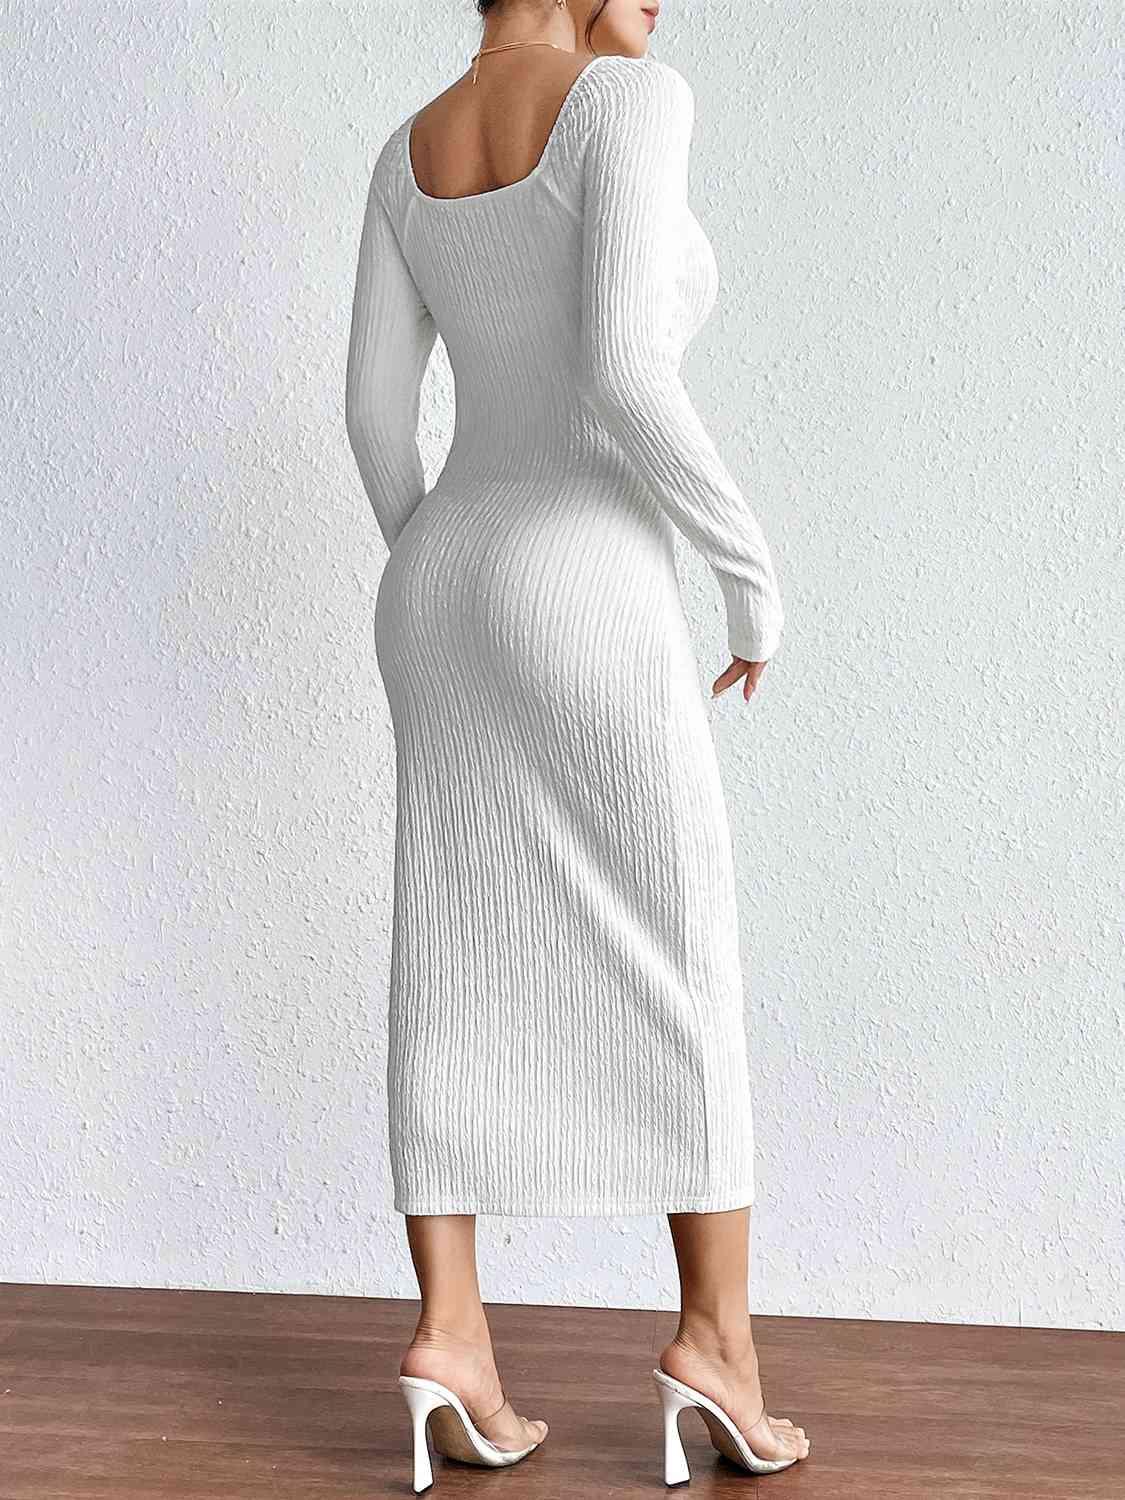 a woman in a white sweater dress